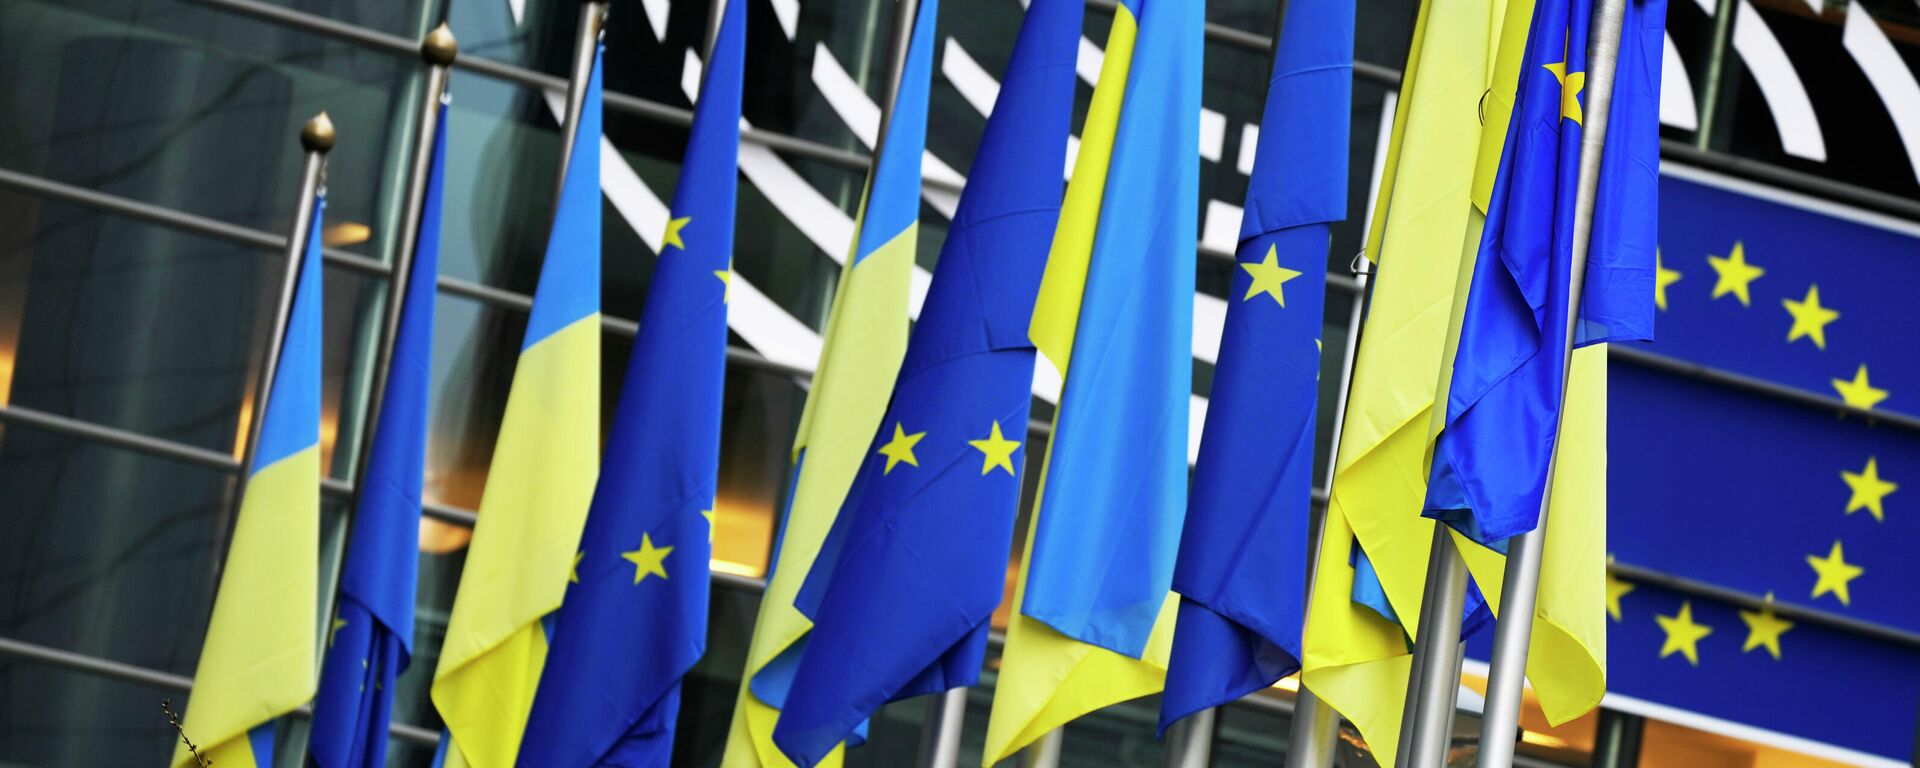 Ukraine and European Union flags hang together on the exterior of the building prior to an extraordinary plenary session on Ukraine at the European Parliament in Brussels, Tuesday, March 1, 2022 - Sputnik International, 1920, 02.02.2023